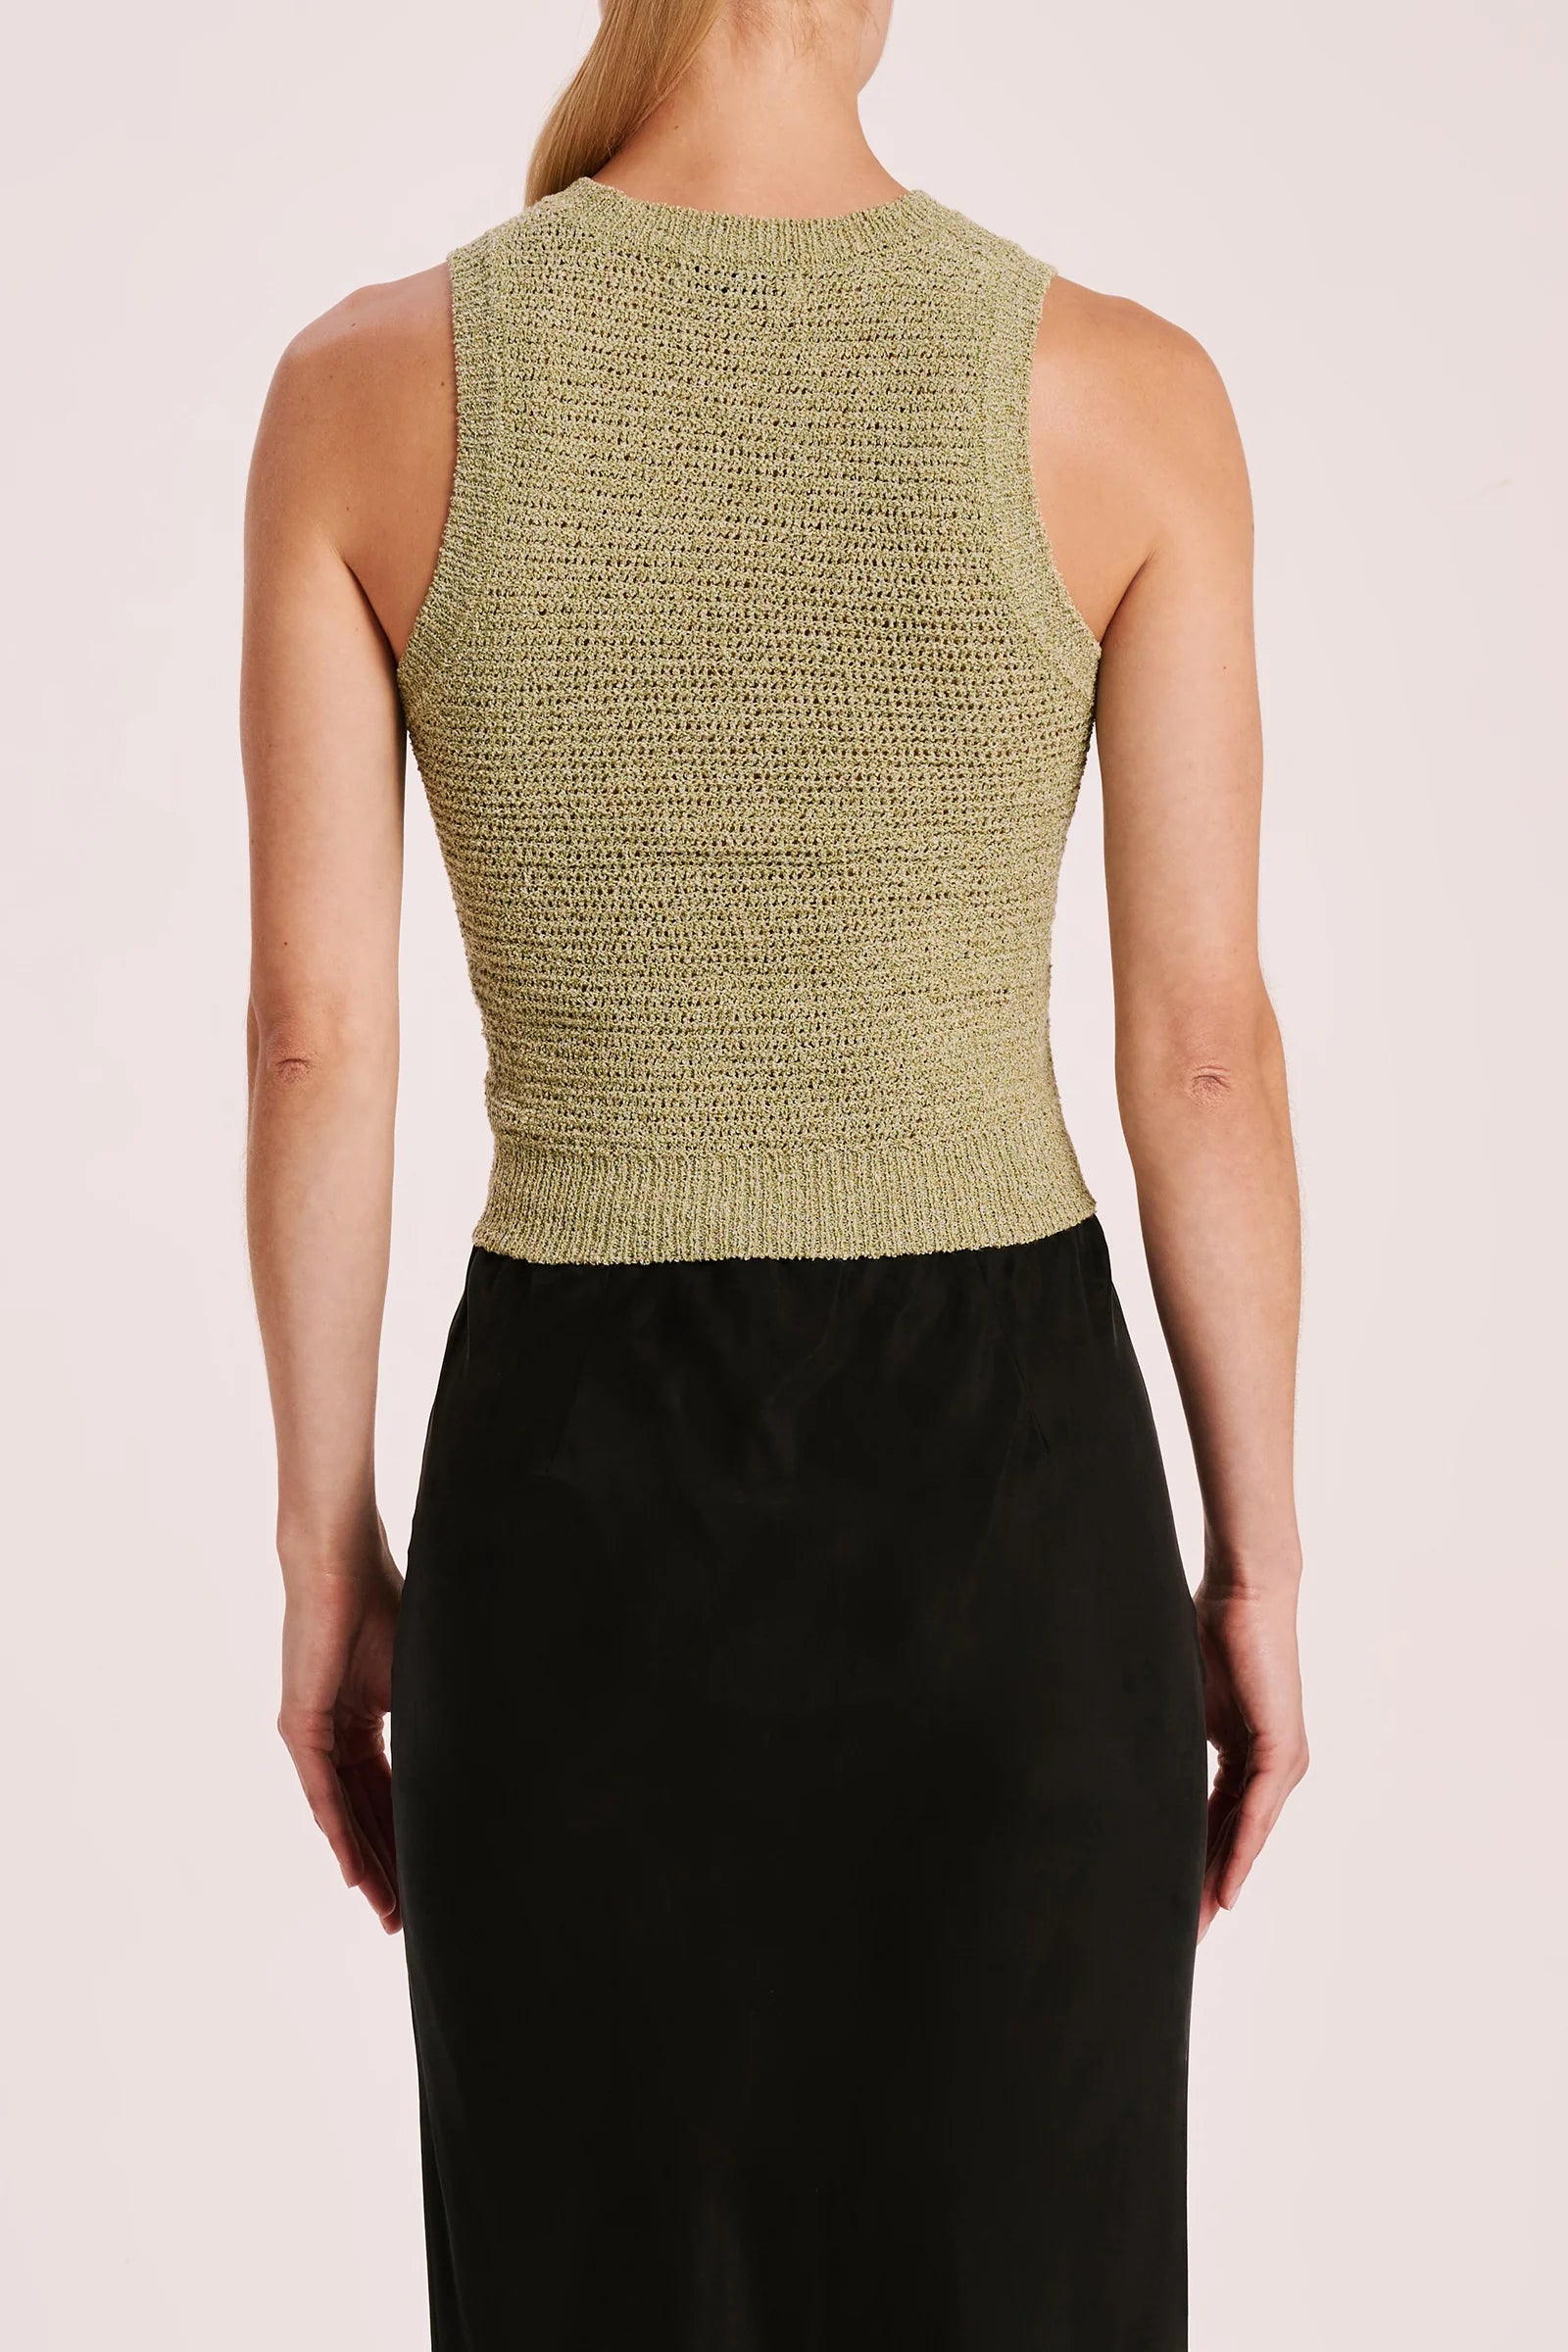 Nude Lucy | Ember Knit Tank - Lime